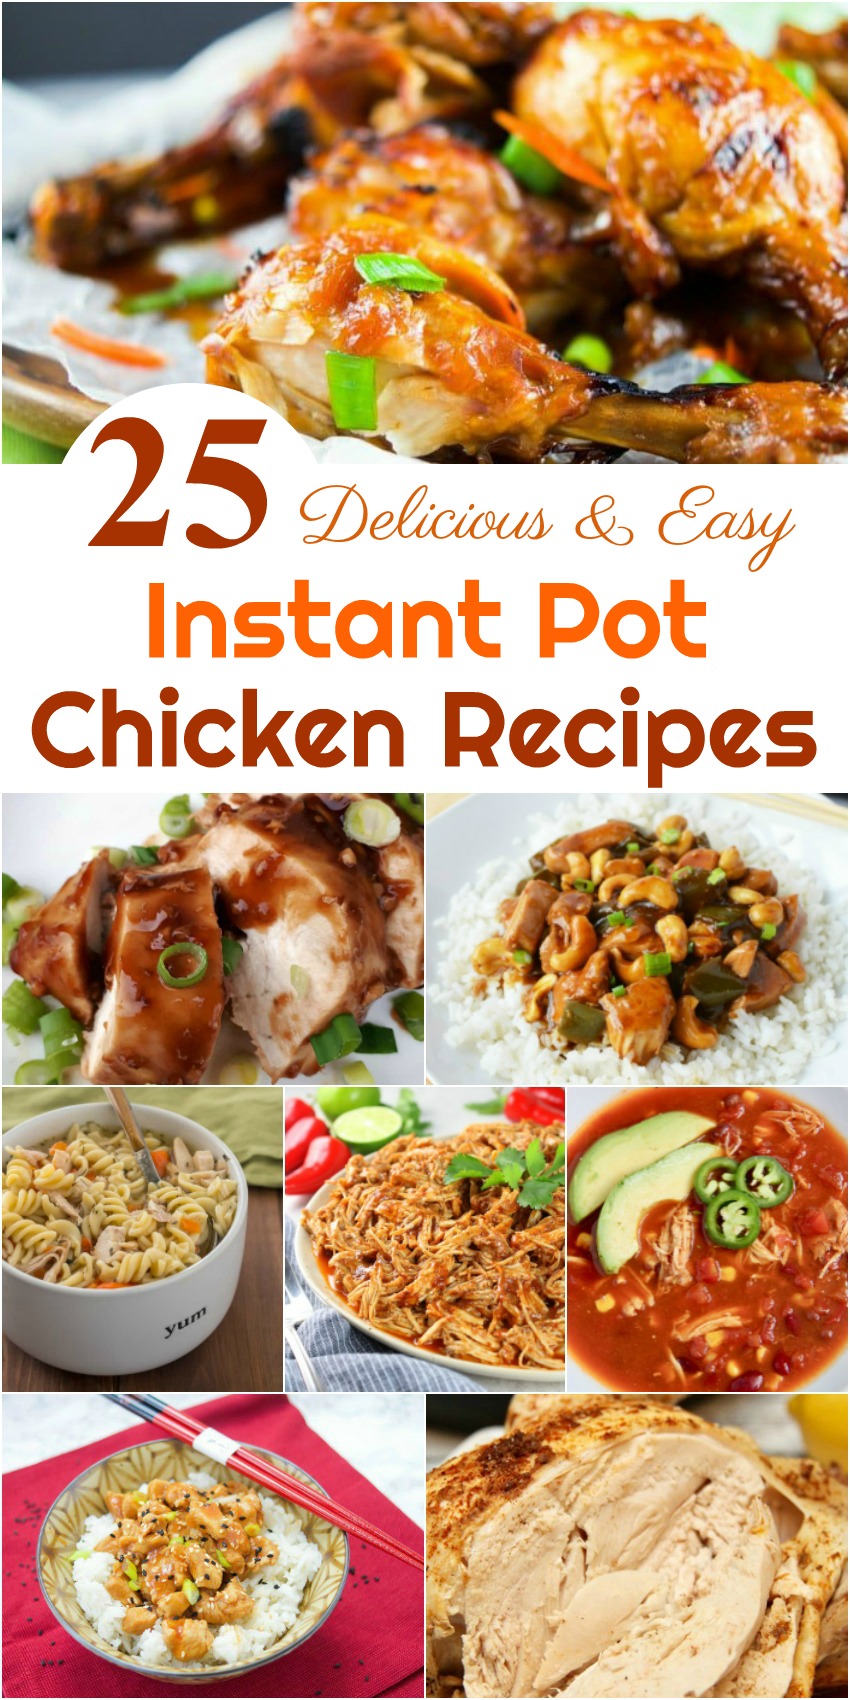 25 Delicious & Easy Instant Pot Chicken Recipes | Budget Earth